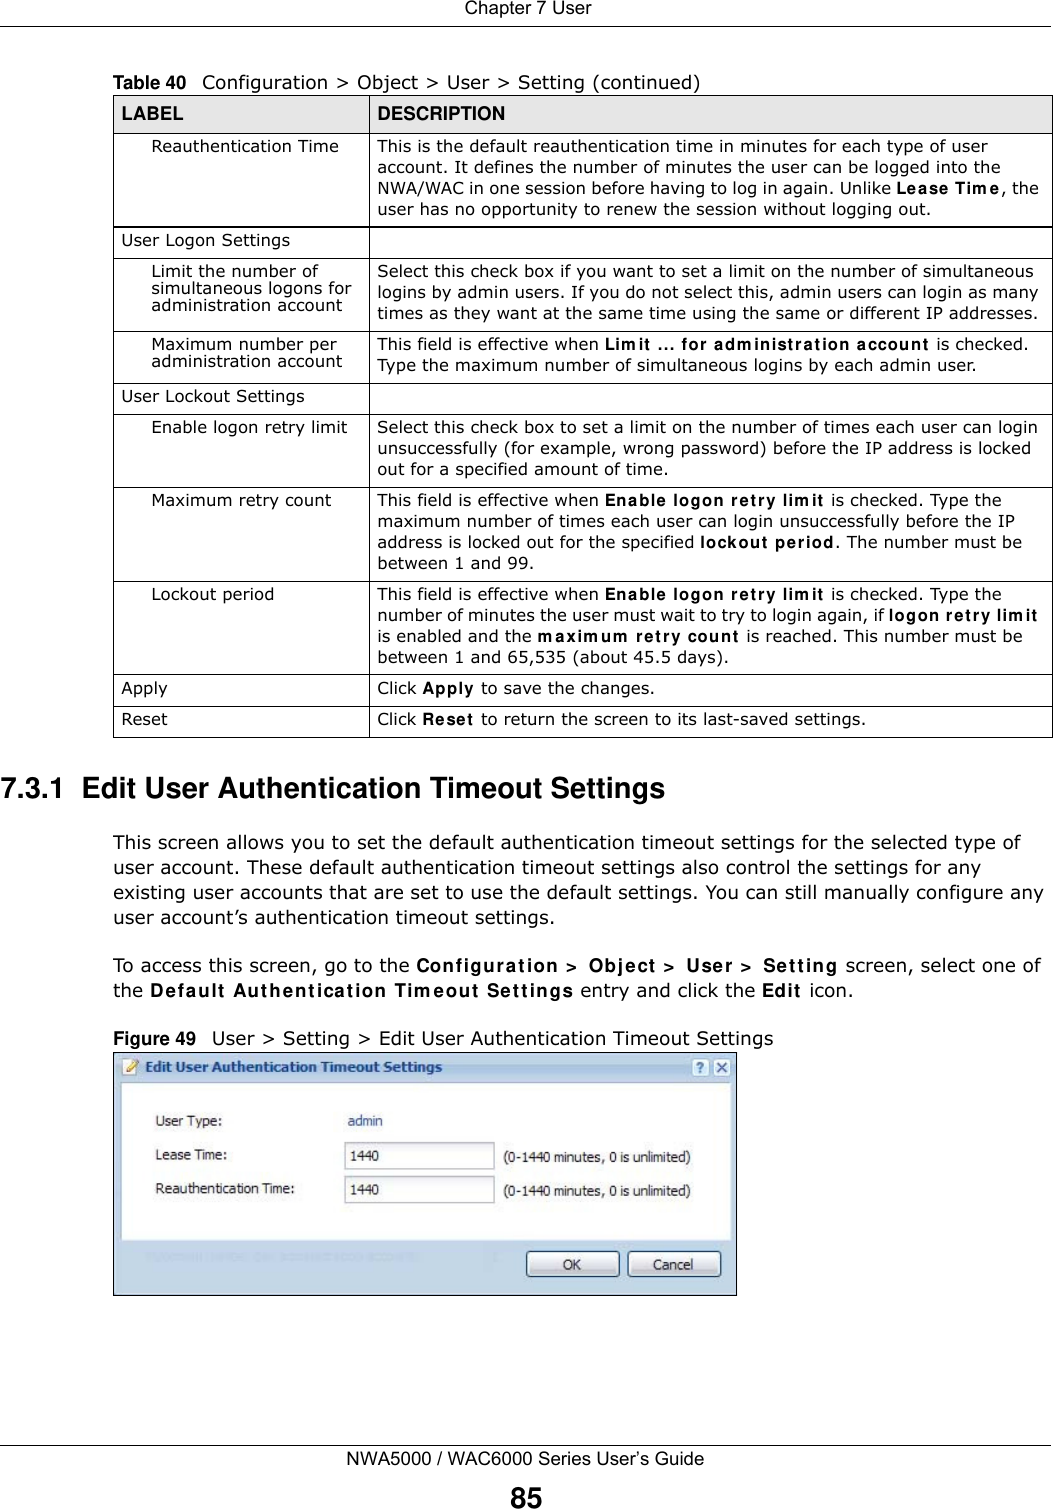  Chapter 7 UserNWA5000 / WAC6000 Series User’s Guide857.3.1  Edit User Authentication Timeout SettingsThis screen allows you to set the default authentication timeout settings for the selected type of user account. These default authentication timeout settings also control the settings for any existing user accounts that are set to use the default settings. You can still manually configure any user account’s authentication timeout settings.To access this screen, go to the Configuration &gt; Object &gt; User &gt; Setting screen, select one of the Default Authentication Timeout Settings entry and click the Edit icon.Figure 49   User &gt; Setting &gt; Edit User Authentication Timeout SettingsReauthentication Time This is the default reauthentication time in minutes for each type of user account. It defines the number of minutes the user can be logged into the NWA/WAC in one session before having to log in again. Unlike Lease Time, the user has no opportunity to renew the session without logging out.User Logon SettingsLimit the number of simultaneous logons for administration accountSelect this check box if you want to set a limit on the number of simultaneous logins by admin users. If you do not select this, admin users can login as many times as they want at the same time using the same or different IP addresses.Maximum number per administration account This field is effective when Limit ... for administration account is checked. Type the maximum number of simultaneous logins by each admin user. User Lockout SettingsEnable logon retry limit Select this check box to set a limit on the number of times each user can login unsuccessfully (for example, wrong password) before the IP address is locked out for a specified amount of time.Maximum retry count This field is effective when Enable logon retry limit is checked. Type the maximum number of times each user can login unsuccessfully before the IP address is locked out for the specified lockout period. The number must be between 1 and 99.Lockout period This field is effective when Enable logon retry limit is checked. Type the number of minutes the user must wait to try to login again, if logon retry limit is enabled and the maximum retry count is reached. This number must be between 1 and 65,535 (about 45.5 days).Apply Click Apply to save the changes. Reset Click Reset to return the screen to its last-saved settings. Table 40   Configuration &gt; Object &gt; User &gt; Setting (continued)LABEL DESCRIPTION